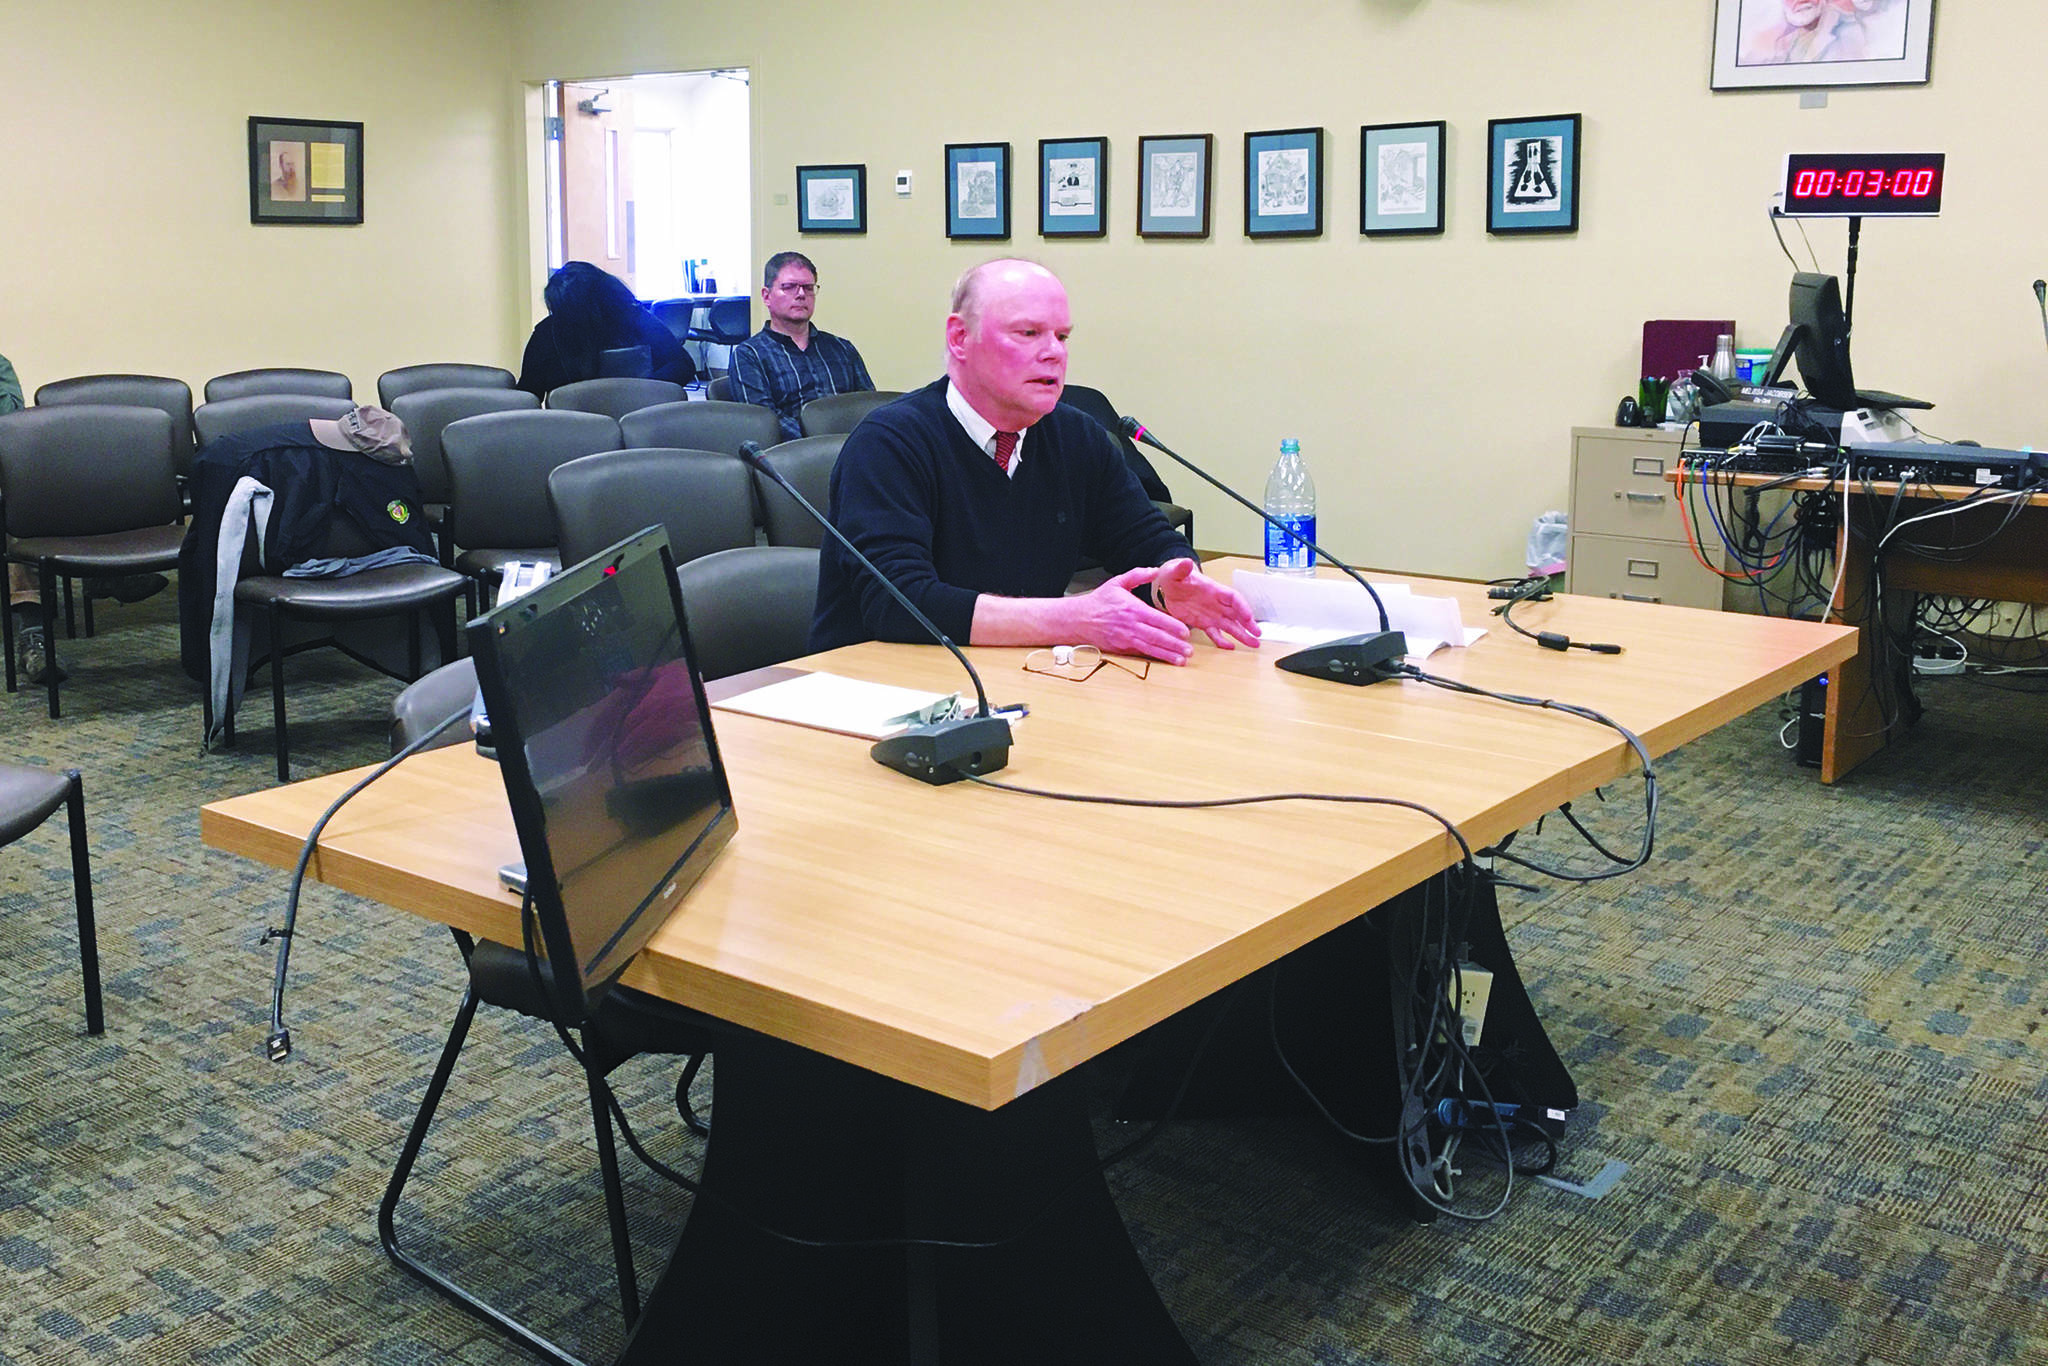 Randy Robertson, a candidate for the Homer city manager position, interviews in front of the Homer City Council on Wednesday, Feb. 26, 2020 at Homer City Hall in Homer, Alaska. The council voted 4-2 to offer the position to Robertson. (Photo by Megan Pacer/Homer News)